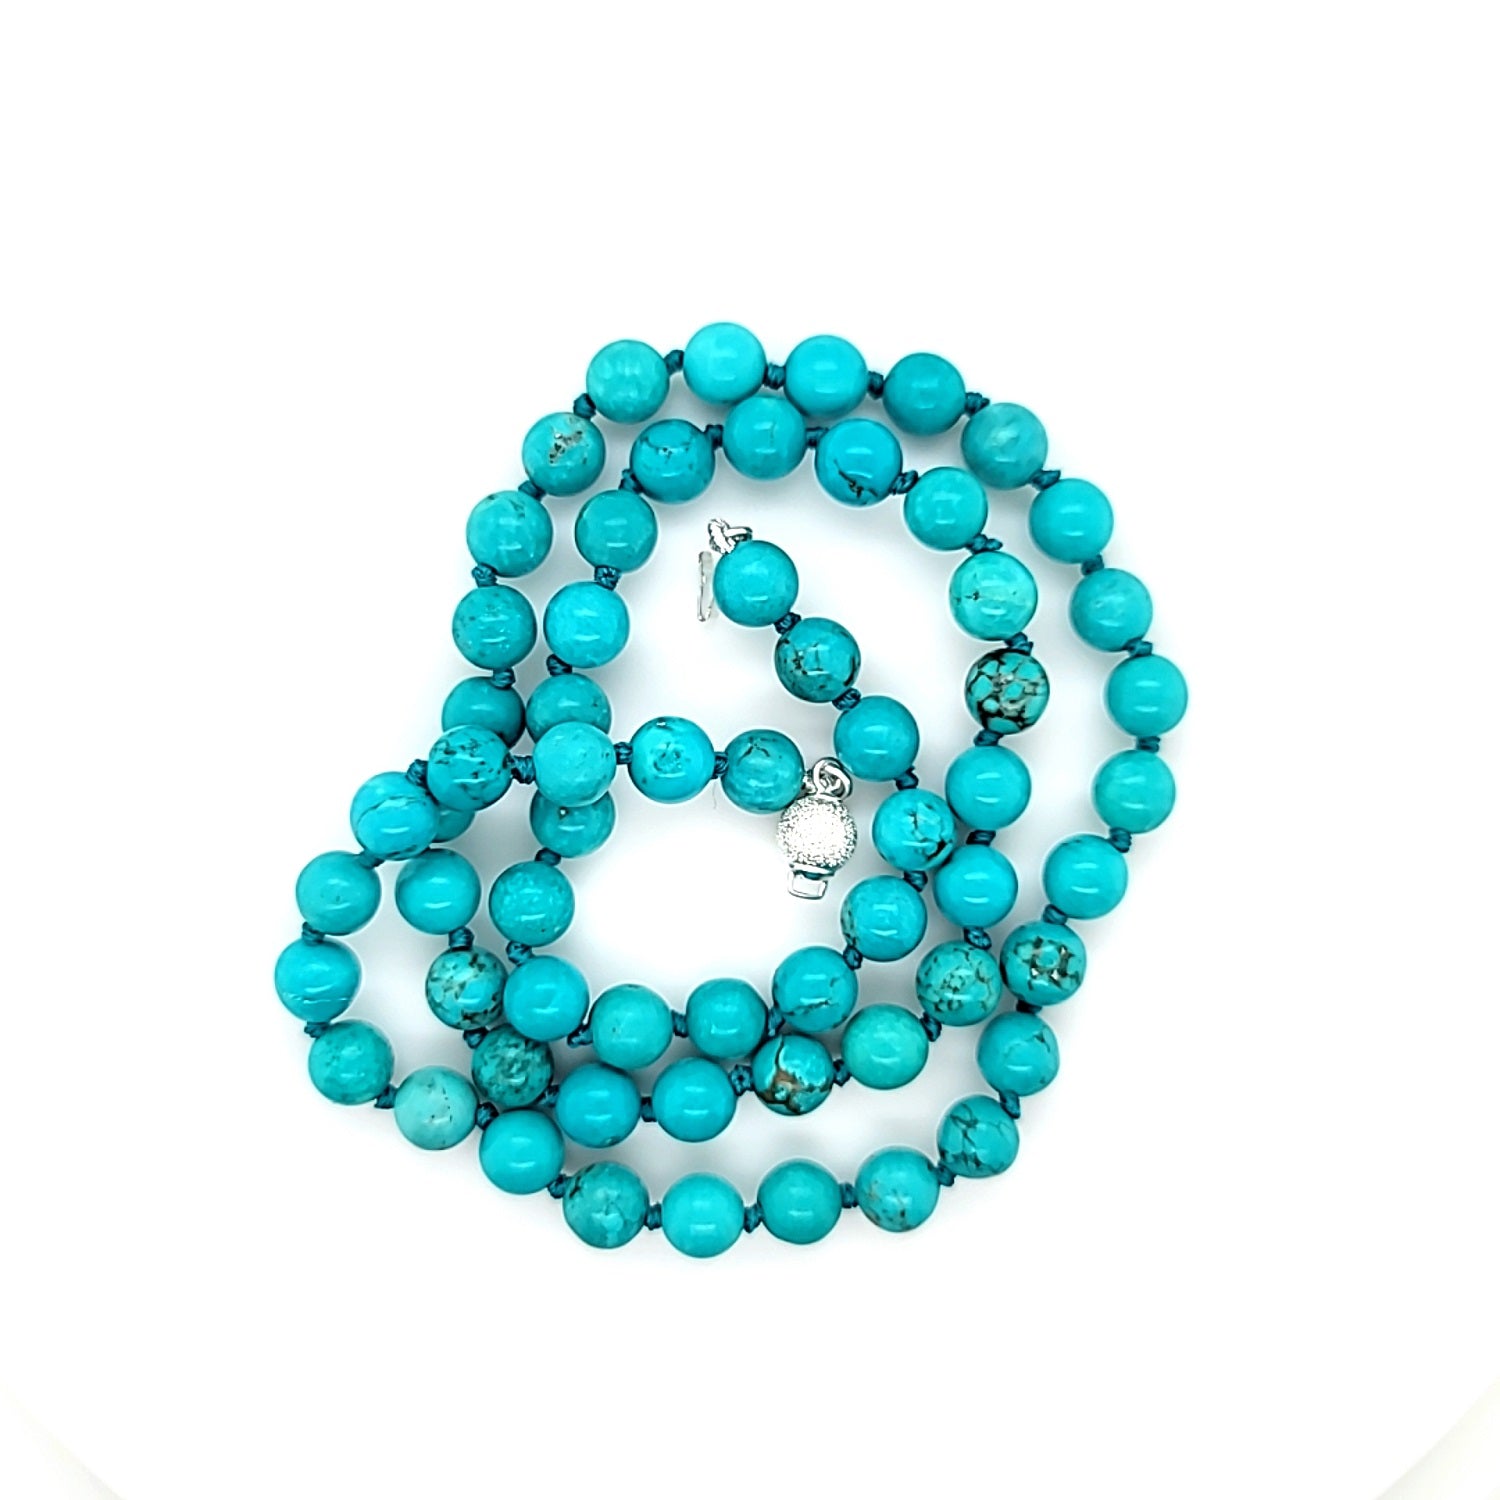 Brand New Turquoise Necklace Strand with Sterling Clasp -6mm